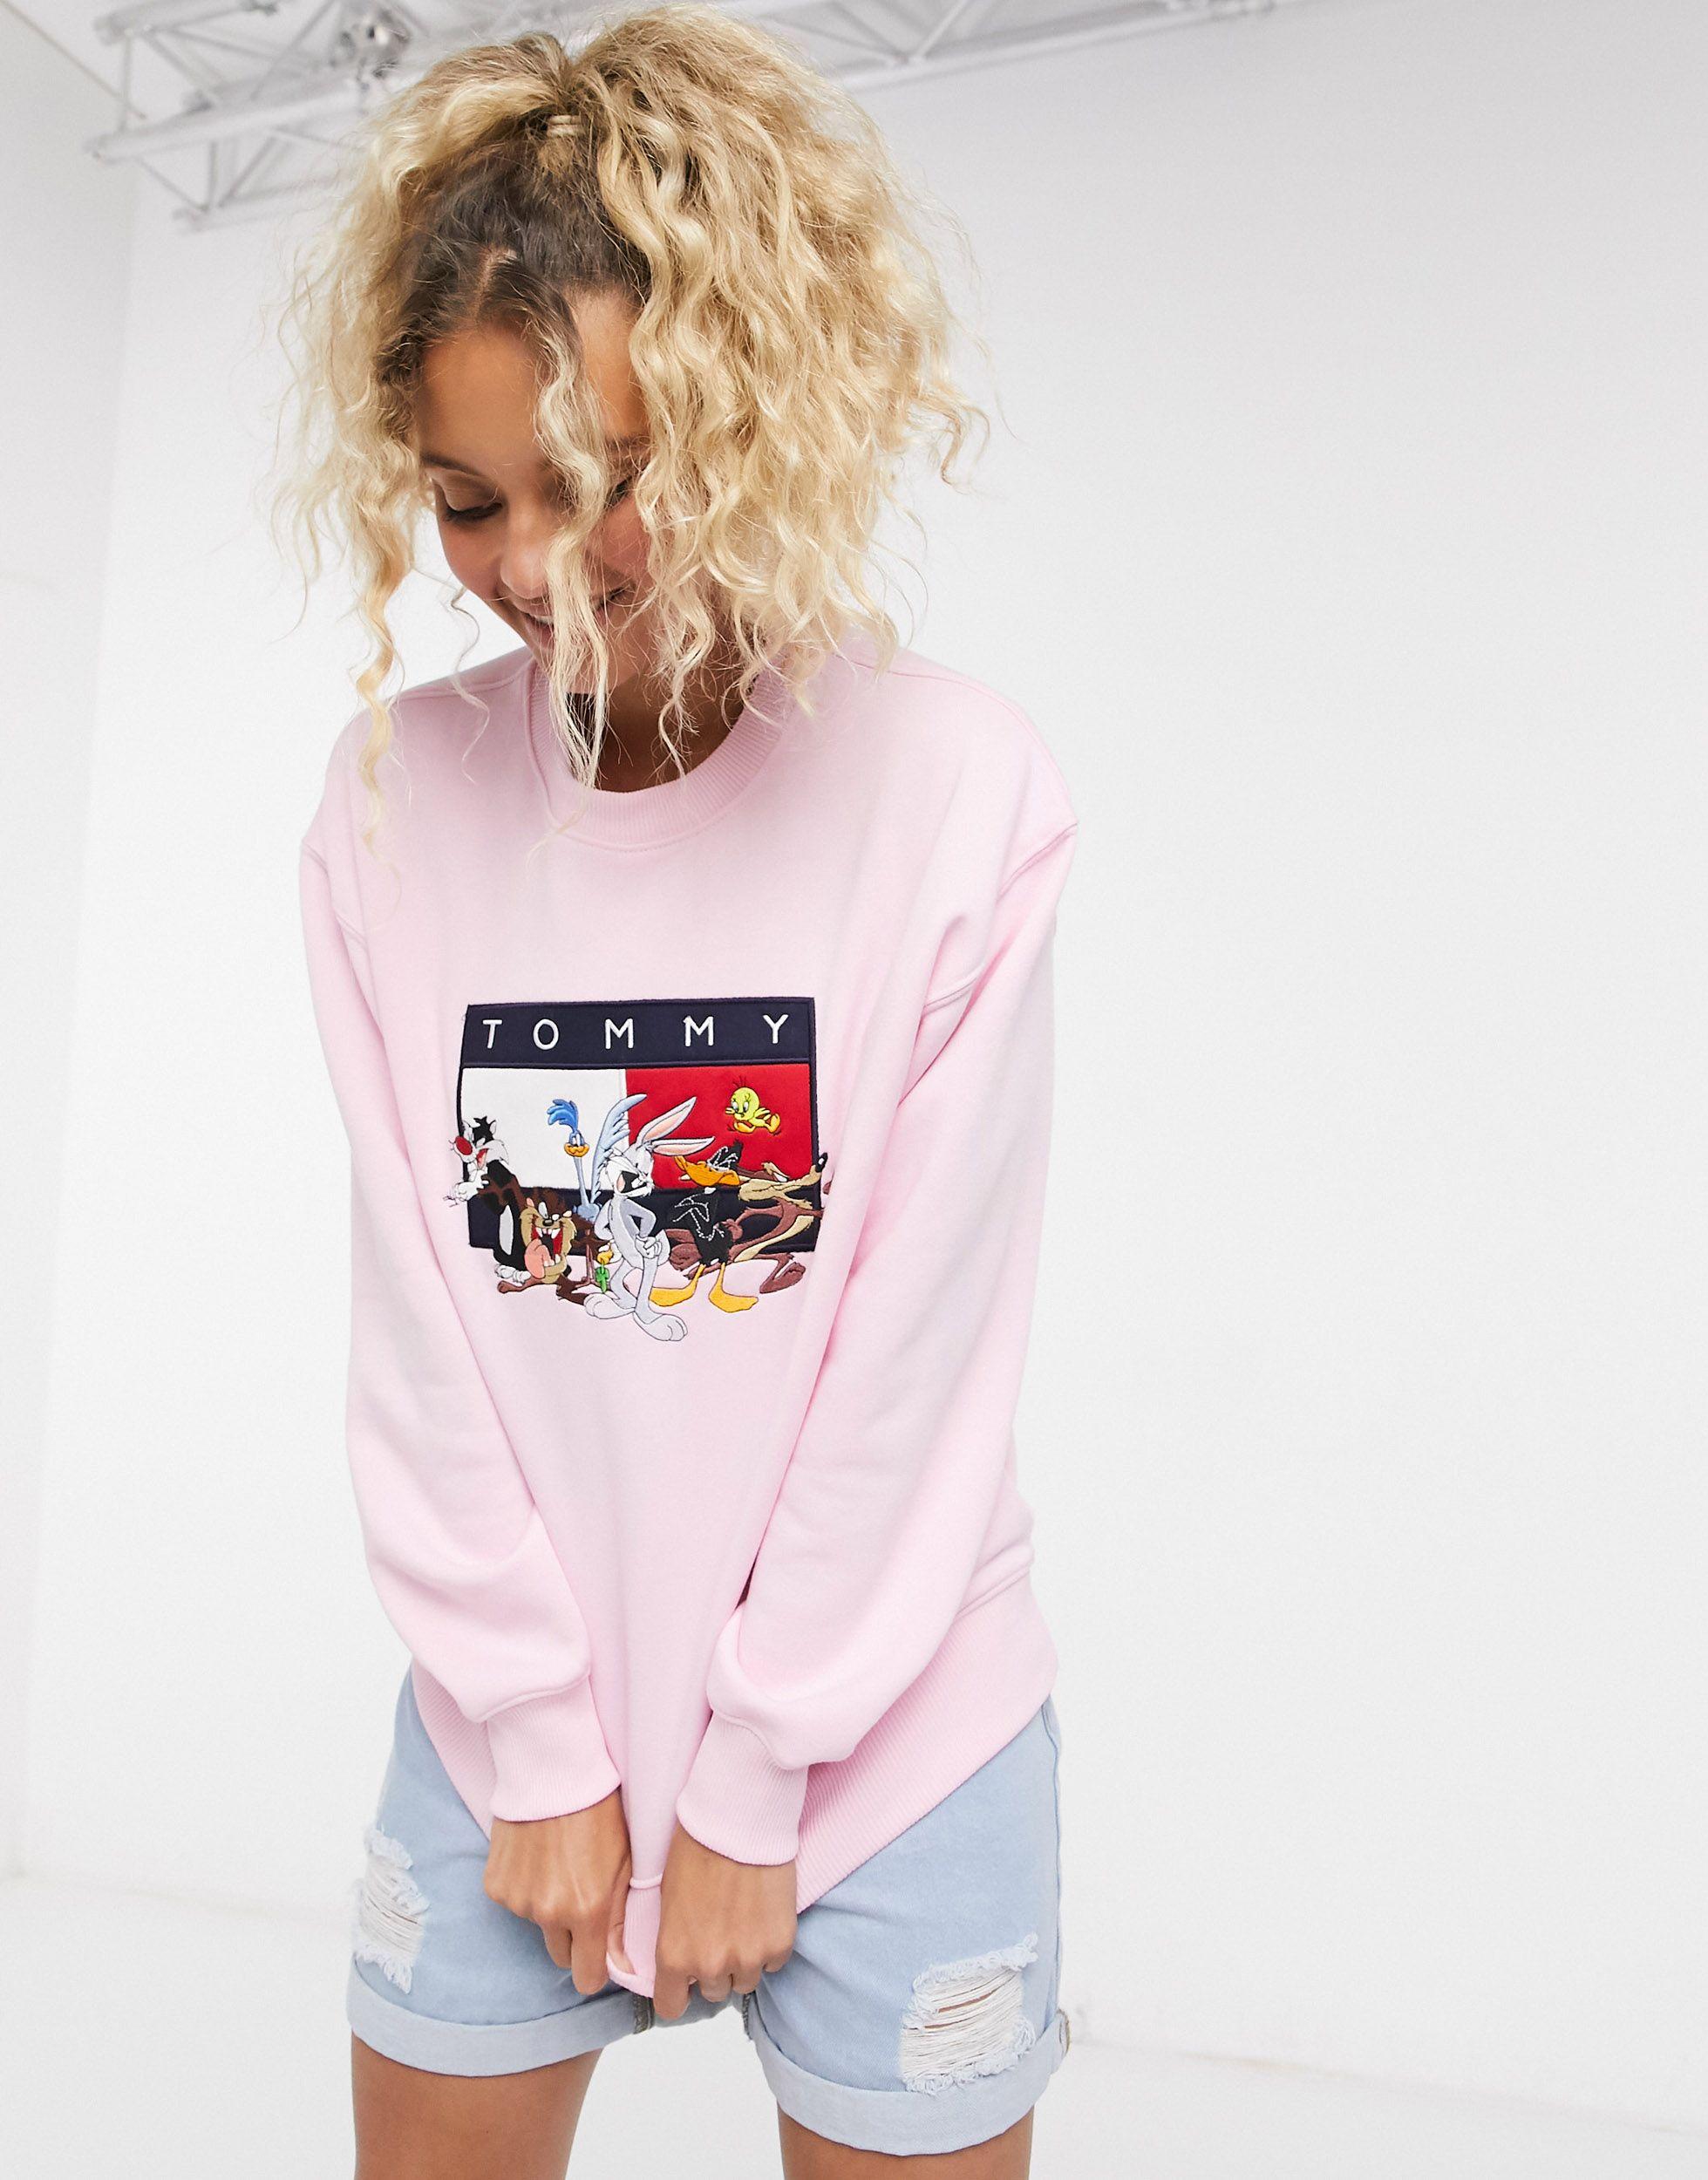 Tommy Jeans X Looney Tunes Embroidered Crew Neck Sweatshirt | islamiyyat.com